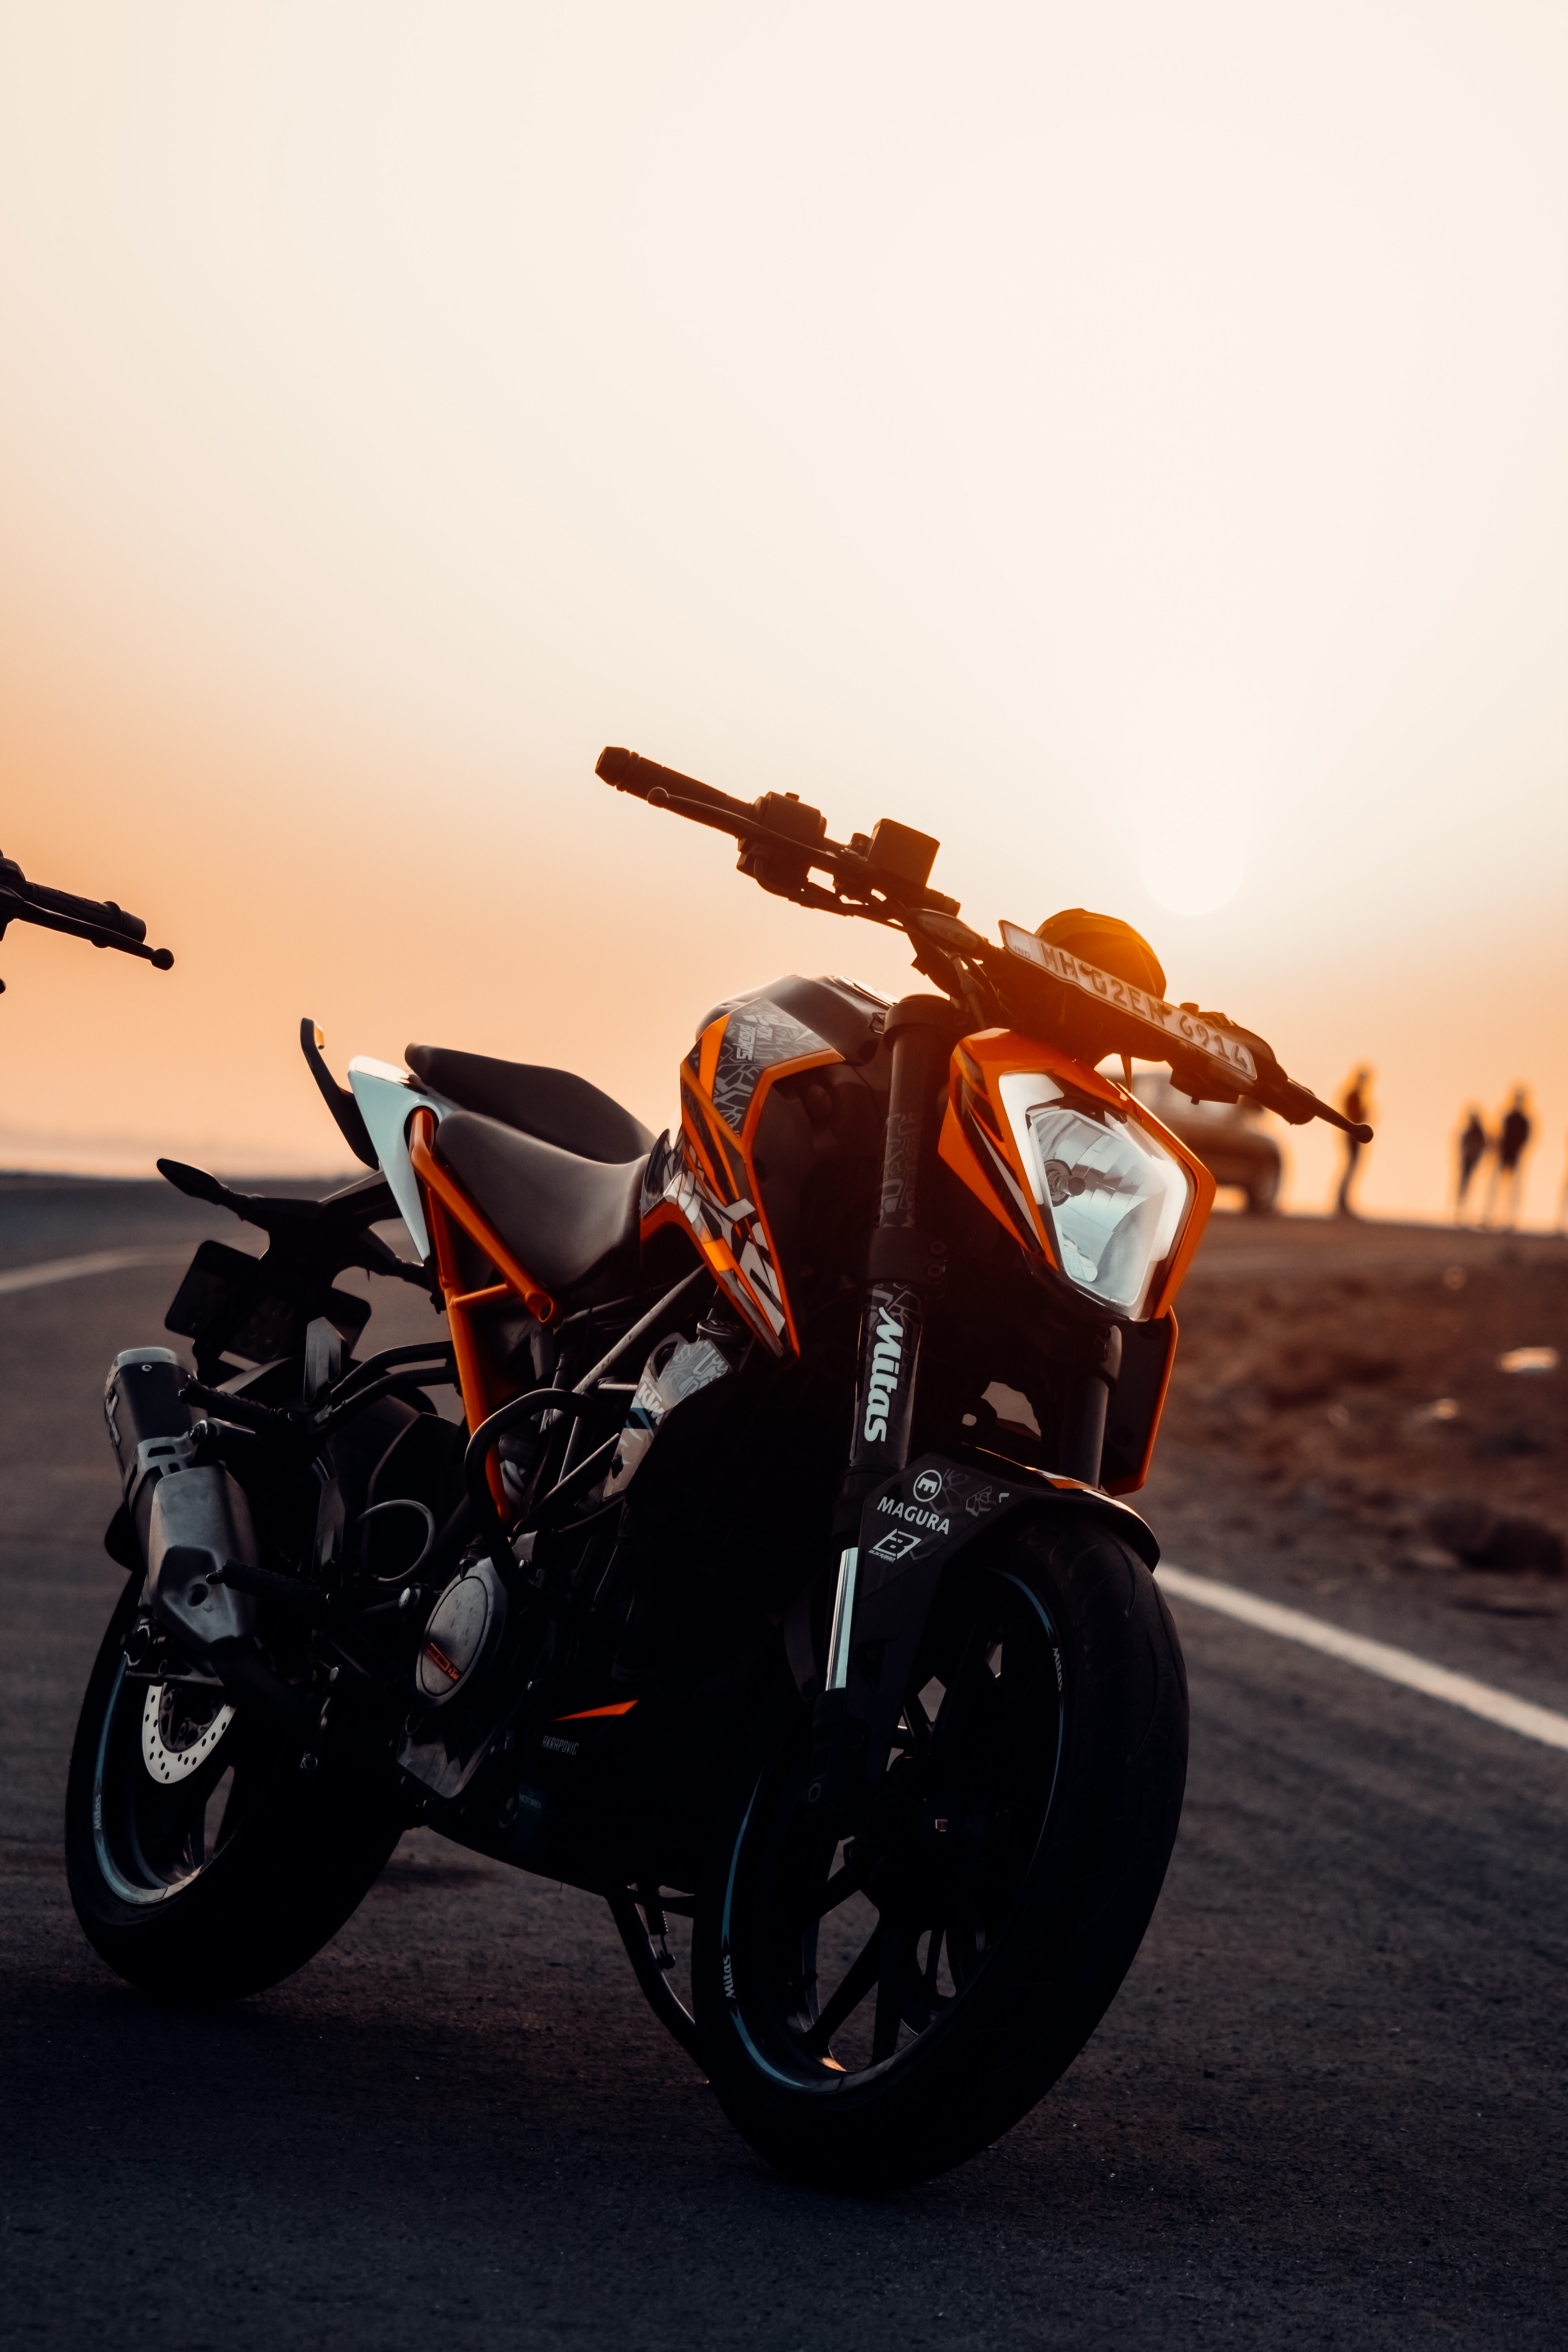 bike, motorcycle, motorcycles, front view, sunset, headlight for android